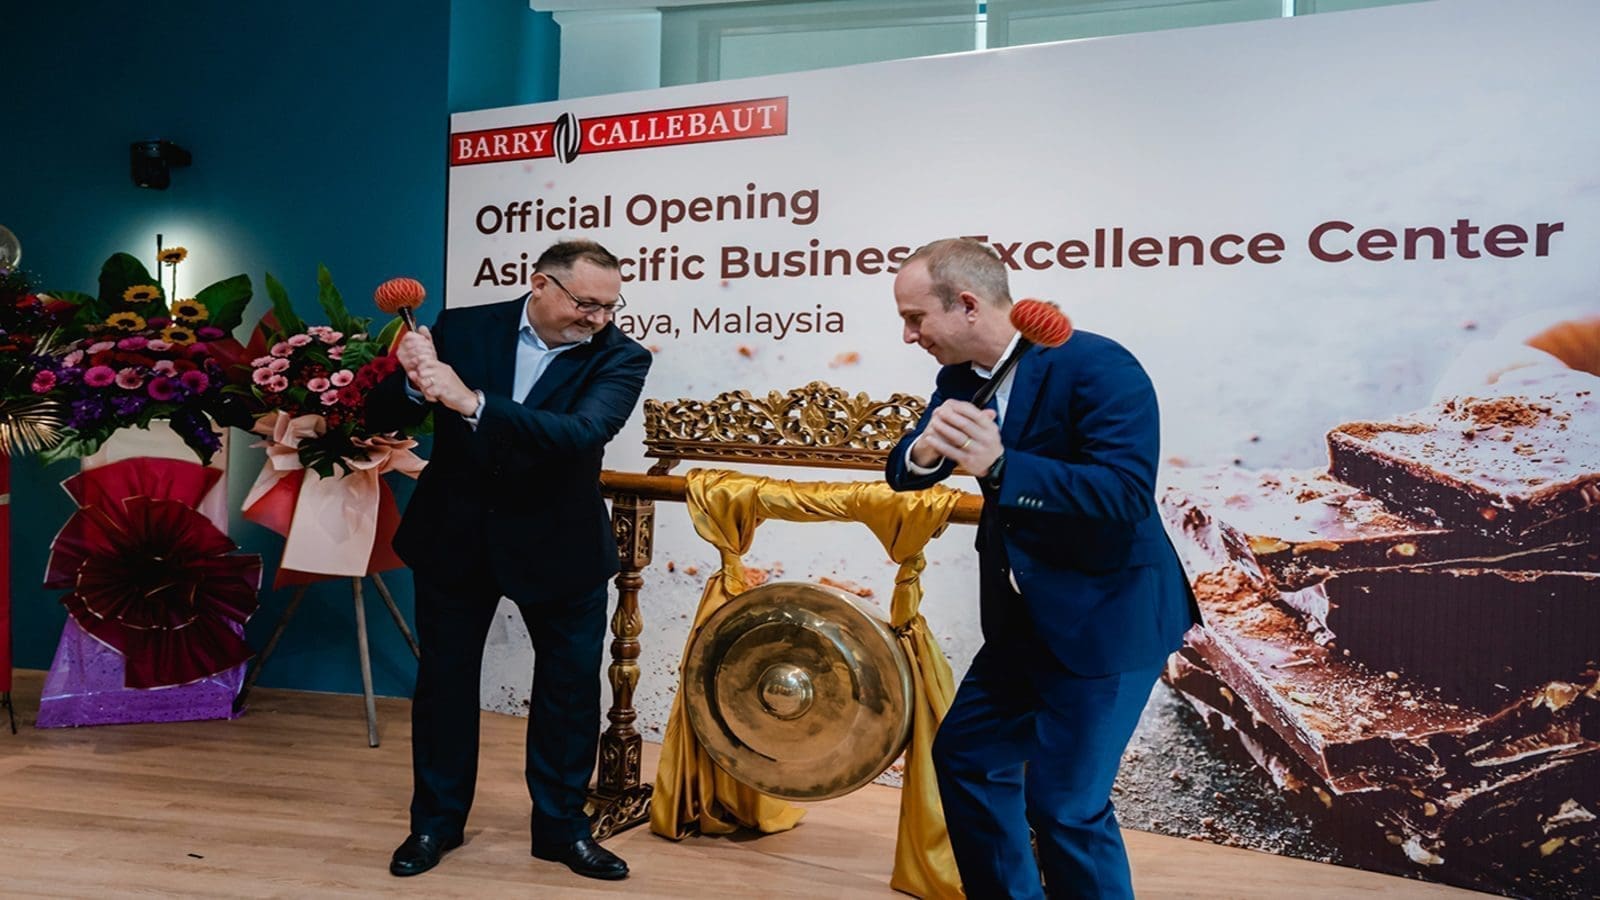 Barry Callebaut strengthens APAC presence with new business excellence centre in Malaysia